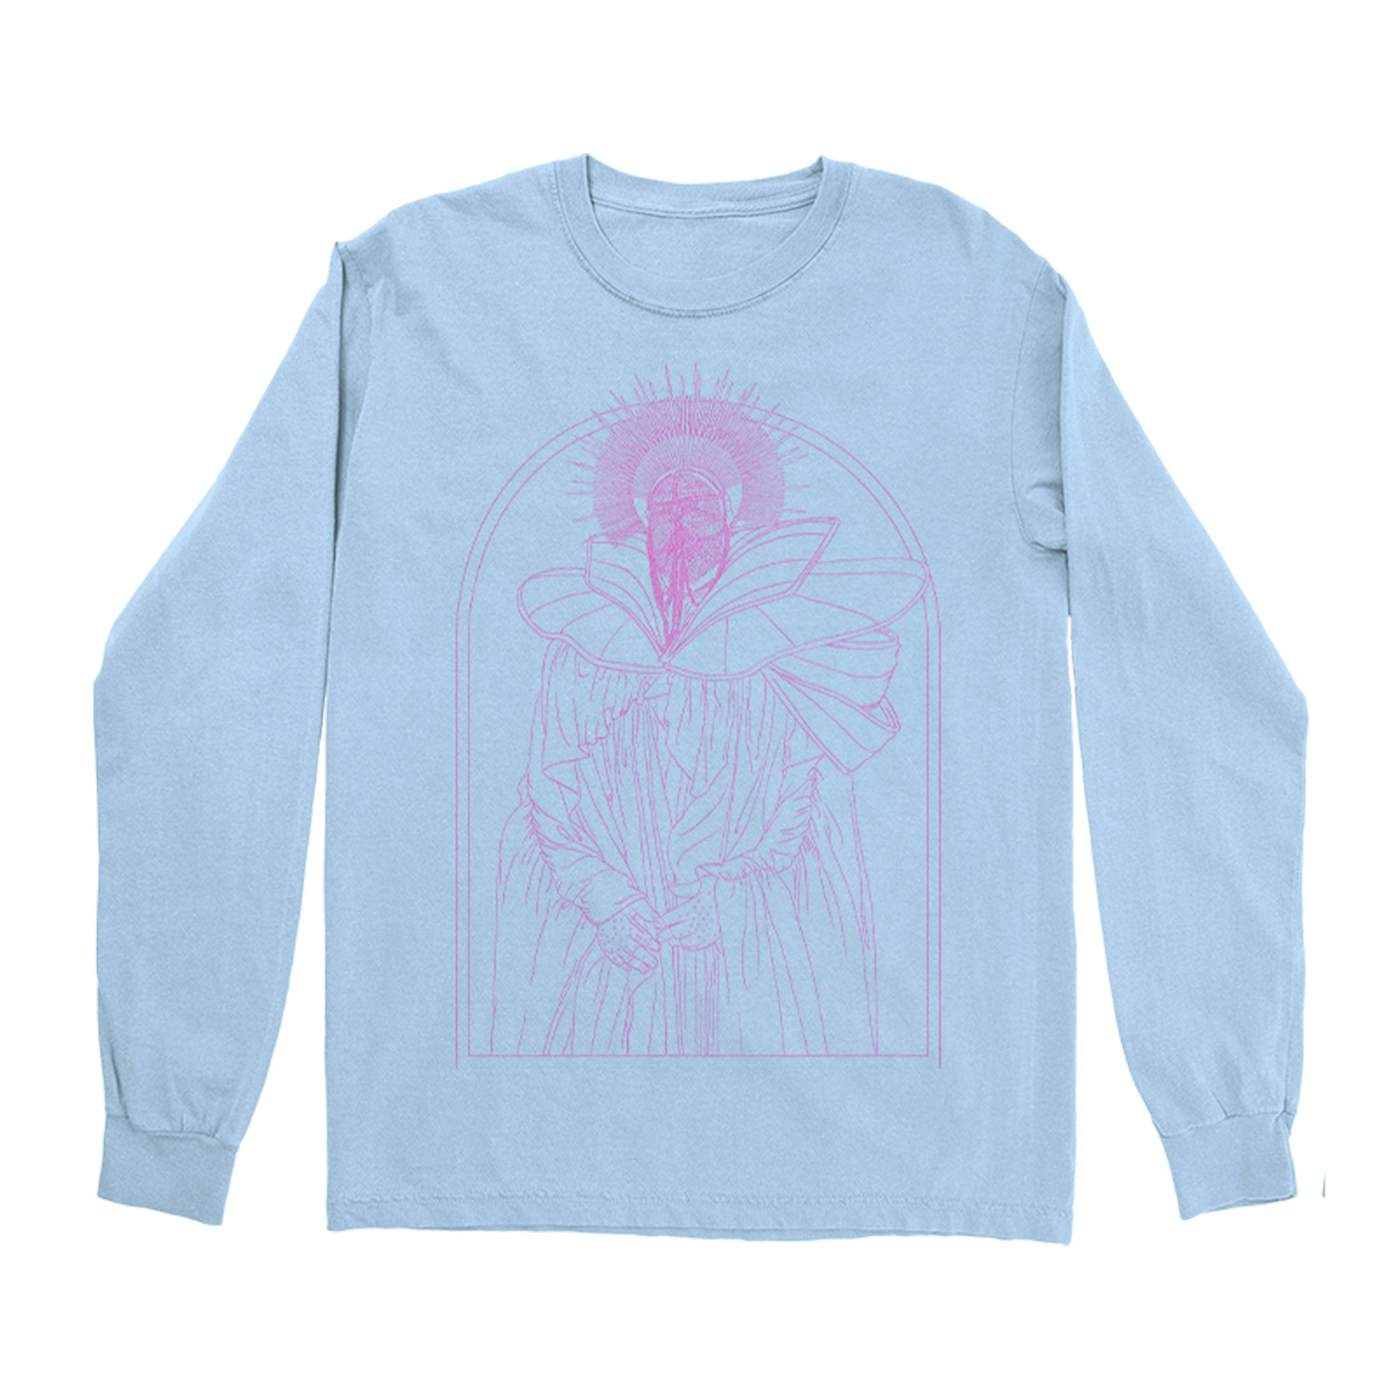 Highly Suspect Ice Cold Long Sleeve T-Shirt